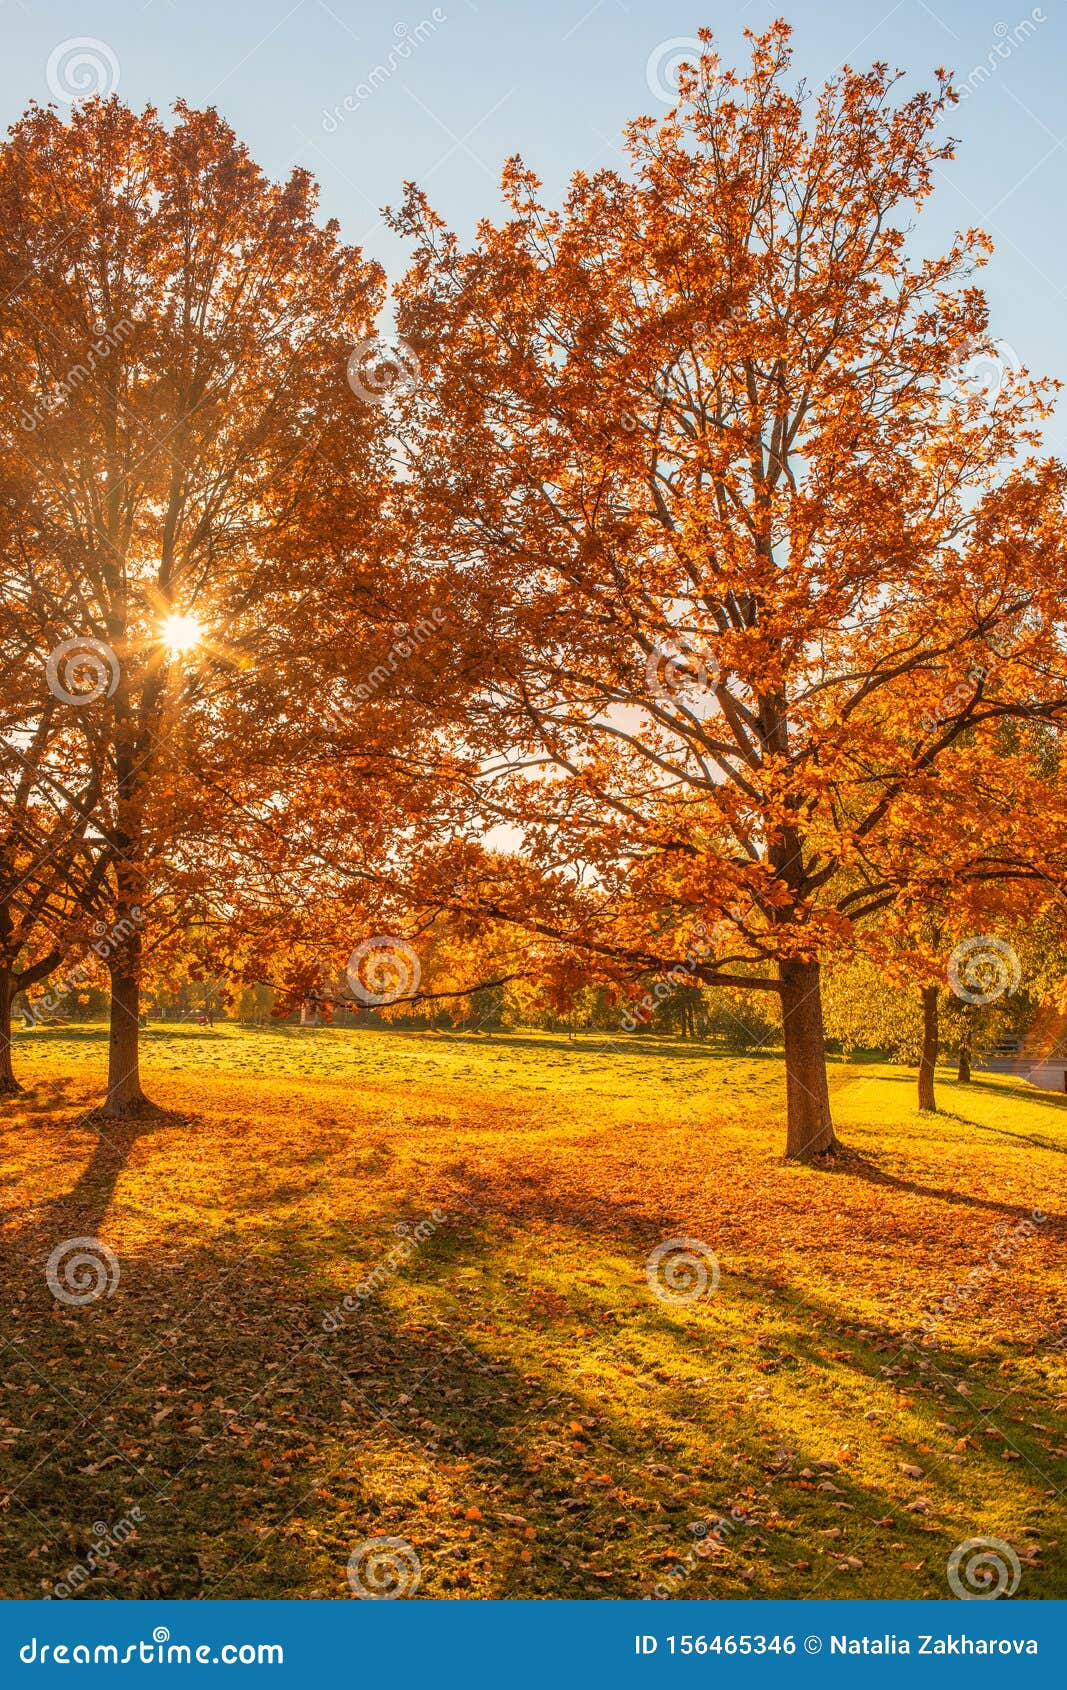 Autumn Landscape Yellow Trees In Forest With Warm Sunshine And Fall